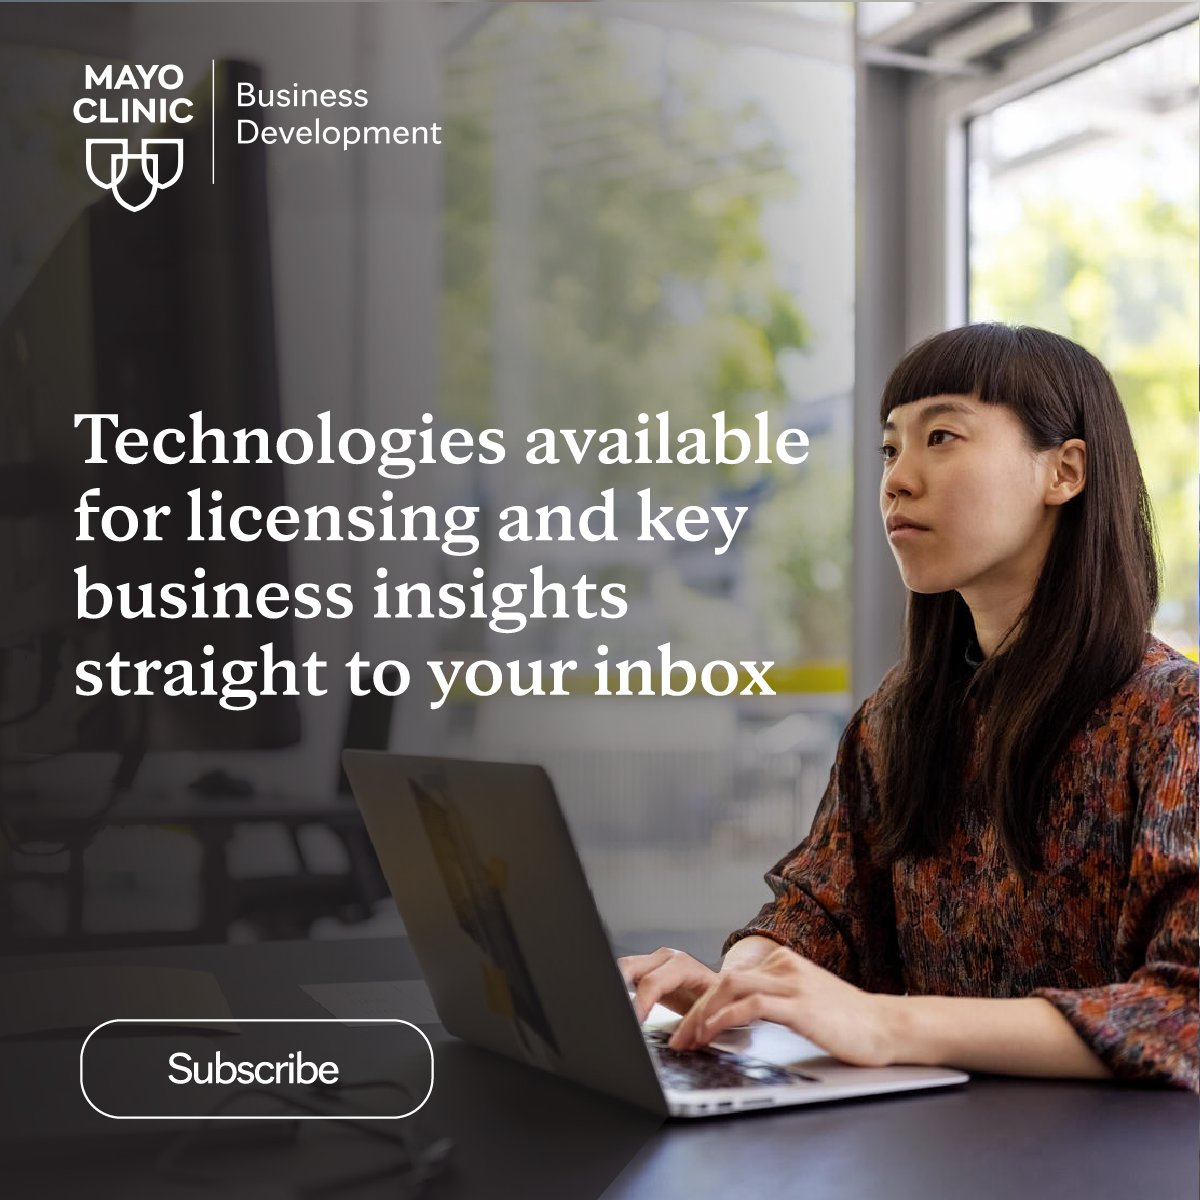 Want to know what's happening in healthcare innovation? Stay up to date with @MayoInvents' newsletter. Subscribe and receive the latest in events, technology, industry trends, and more. links.e.response.mayoclinic.org/BusDevExternal #MayoClinic #Innovation #News #Healthcare #Technology